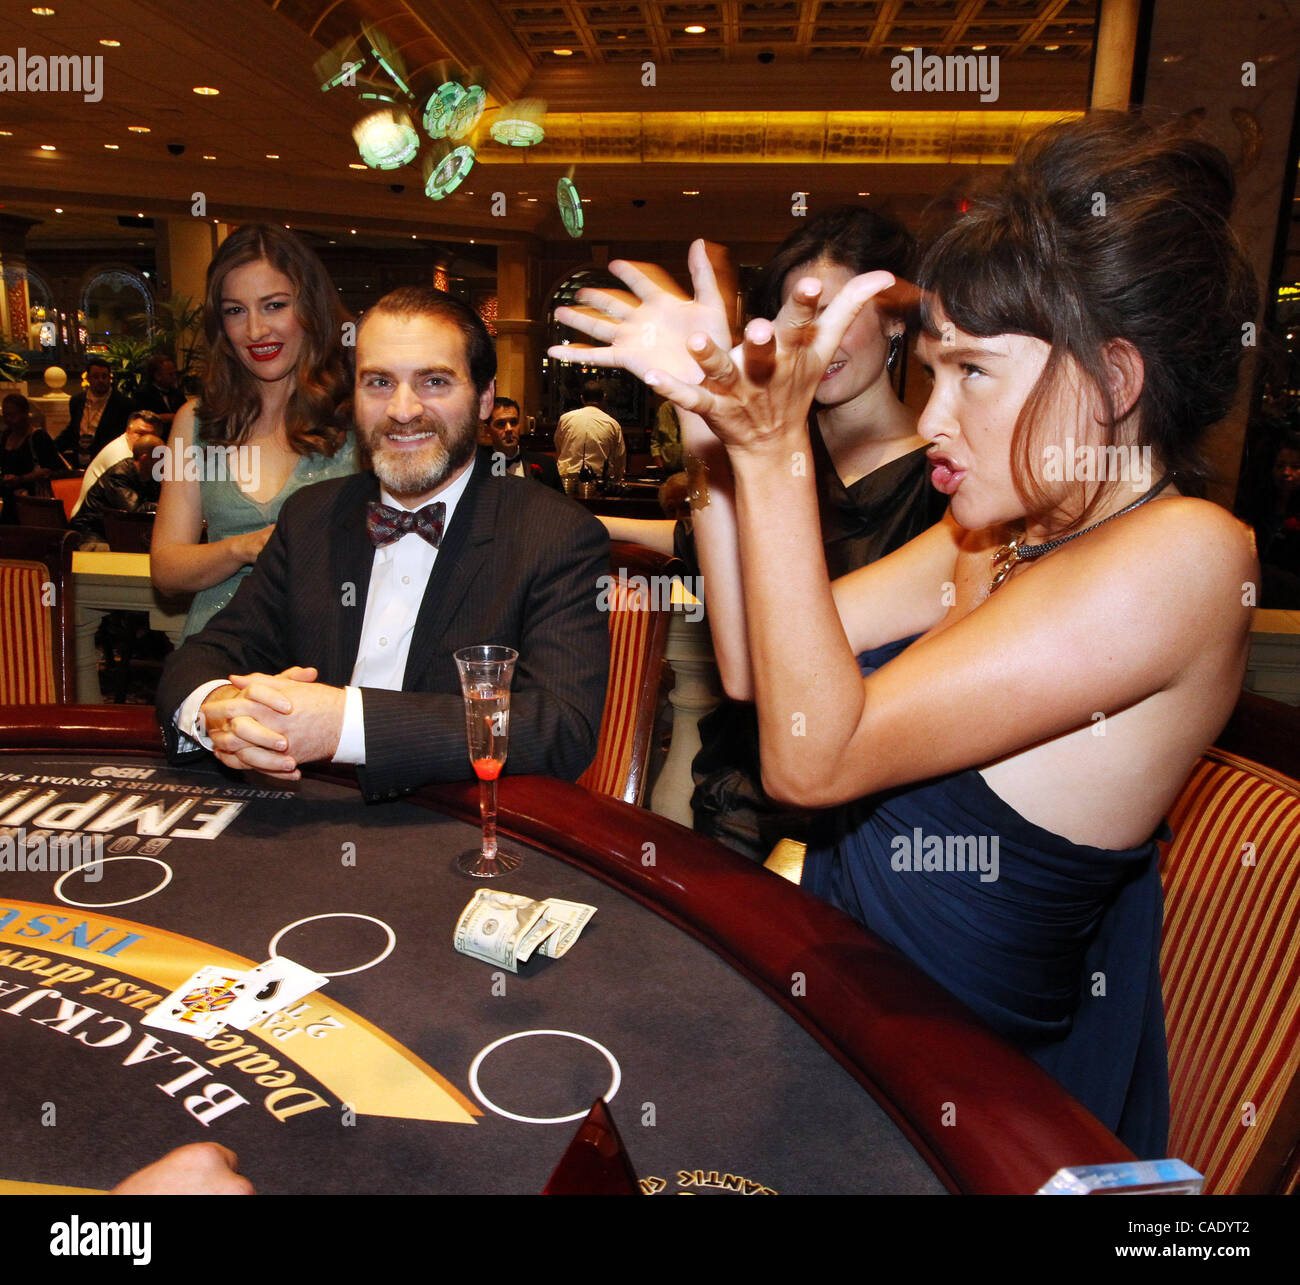 Sep 16, 2010 - Atlantic City, New Jersey, U.S. - PAZ DE LA HUERTA throws her chips in the air on Caesars casino floor high limit tables as they are in town for the HBO & Caesars Premier of  'Boardwalk Empire'  (Credit Image: © Tom Briglia/ZUMApress.com) Stock Photo